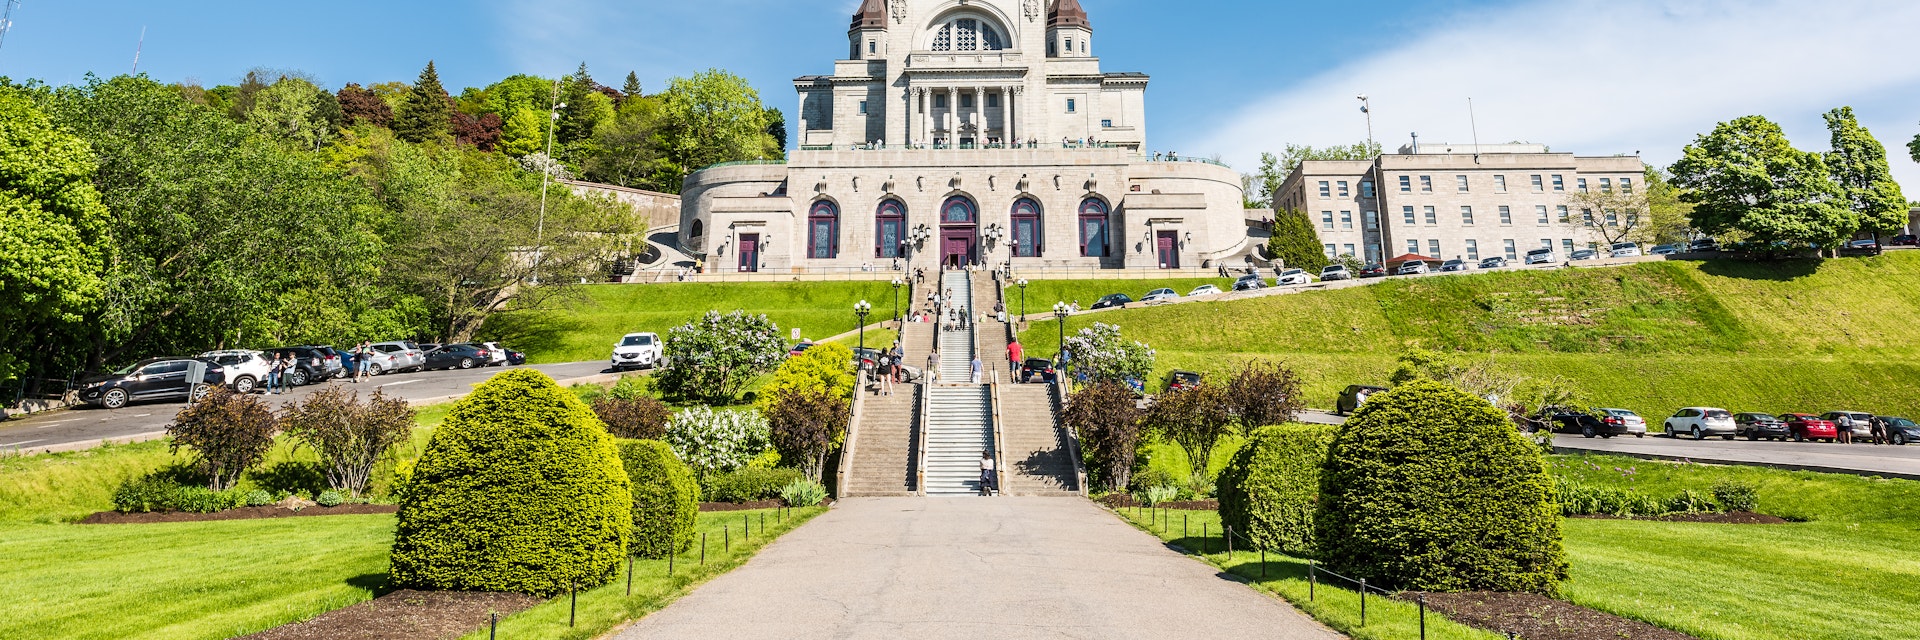 May 28, 2017: St Joseph's Oratory on Mont Royal with a woman praying on steps.